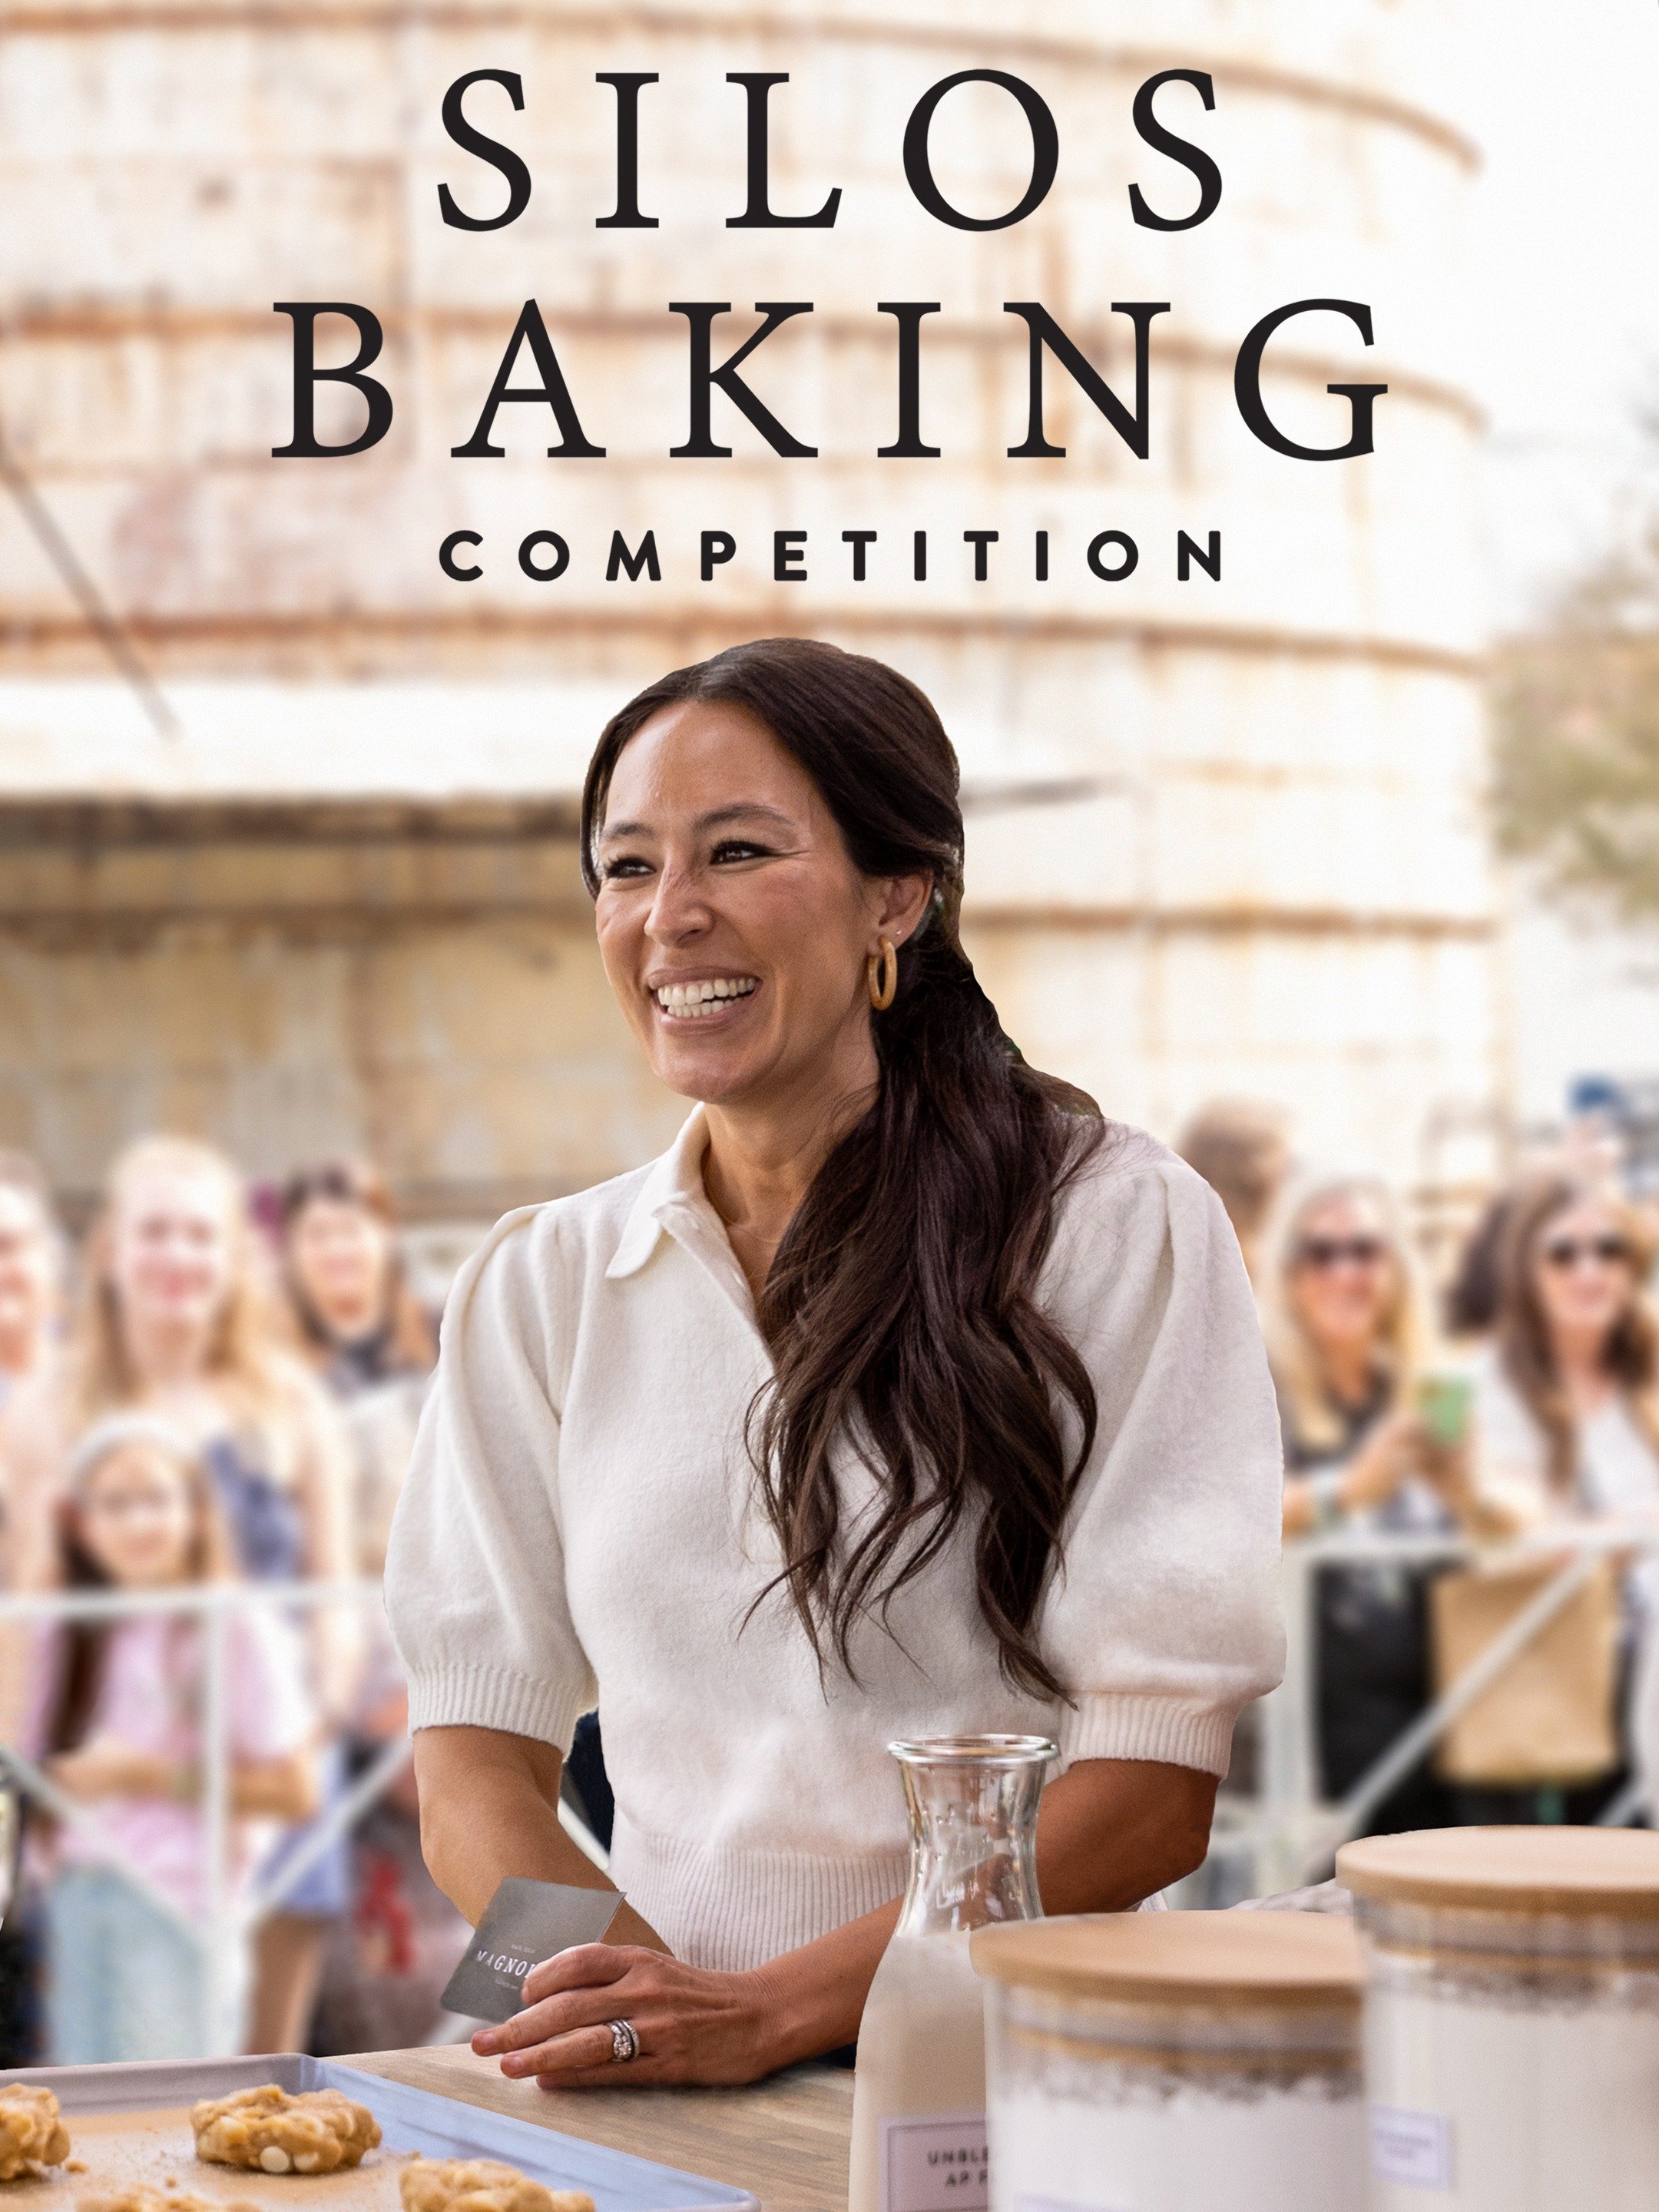 Silos Baking Competition Rotten Tomatoes